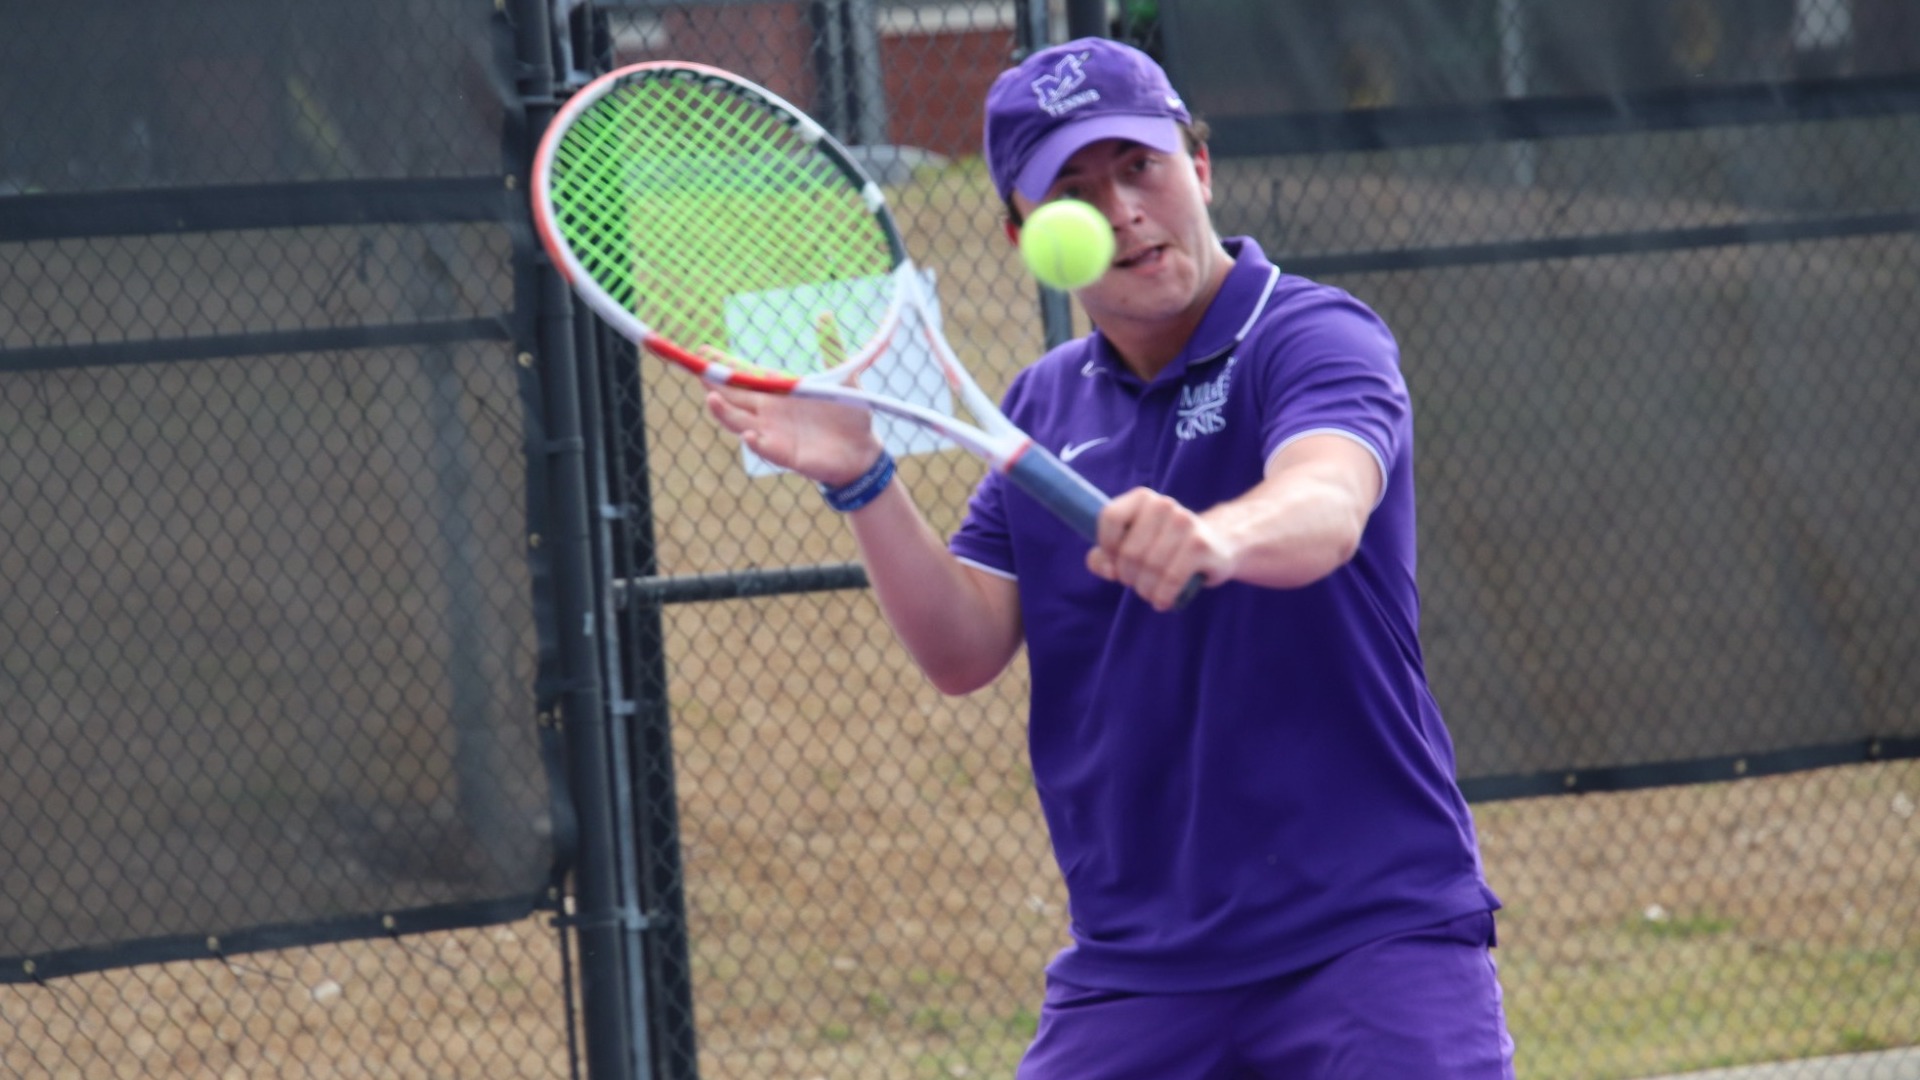 A man in a purple shirt and shorts engaged in a game of tennis.